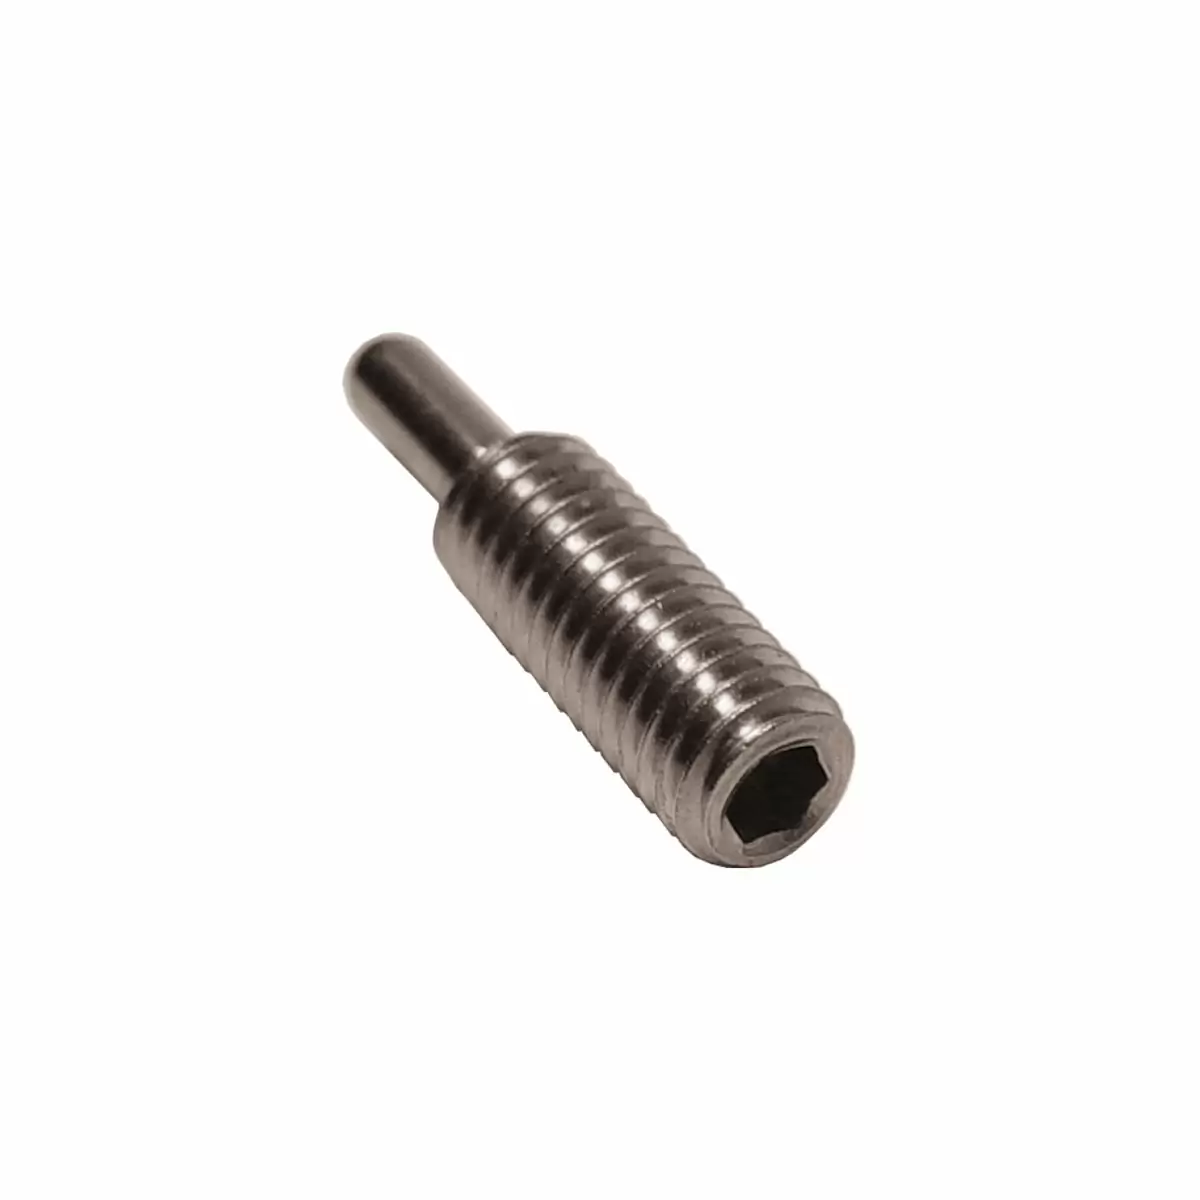 replacement pin for chain rivet extractor pliers - image